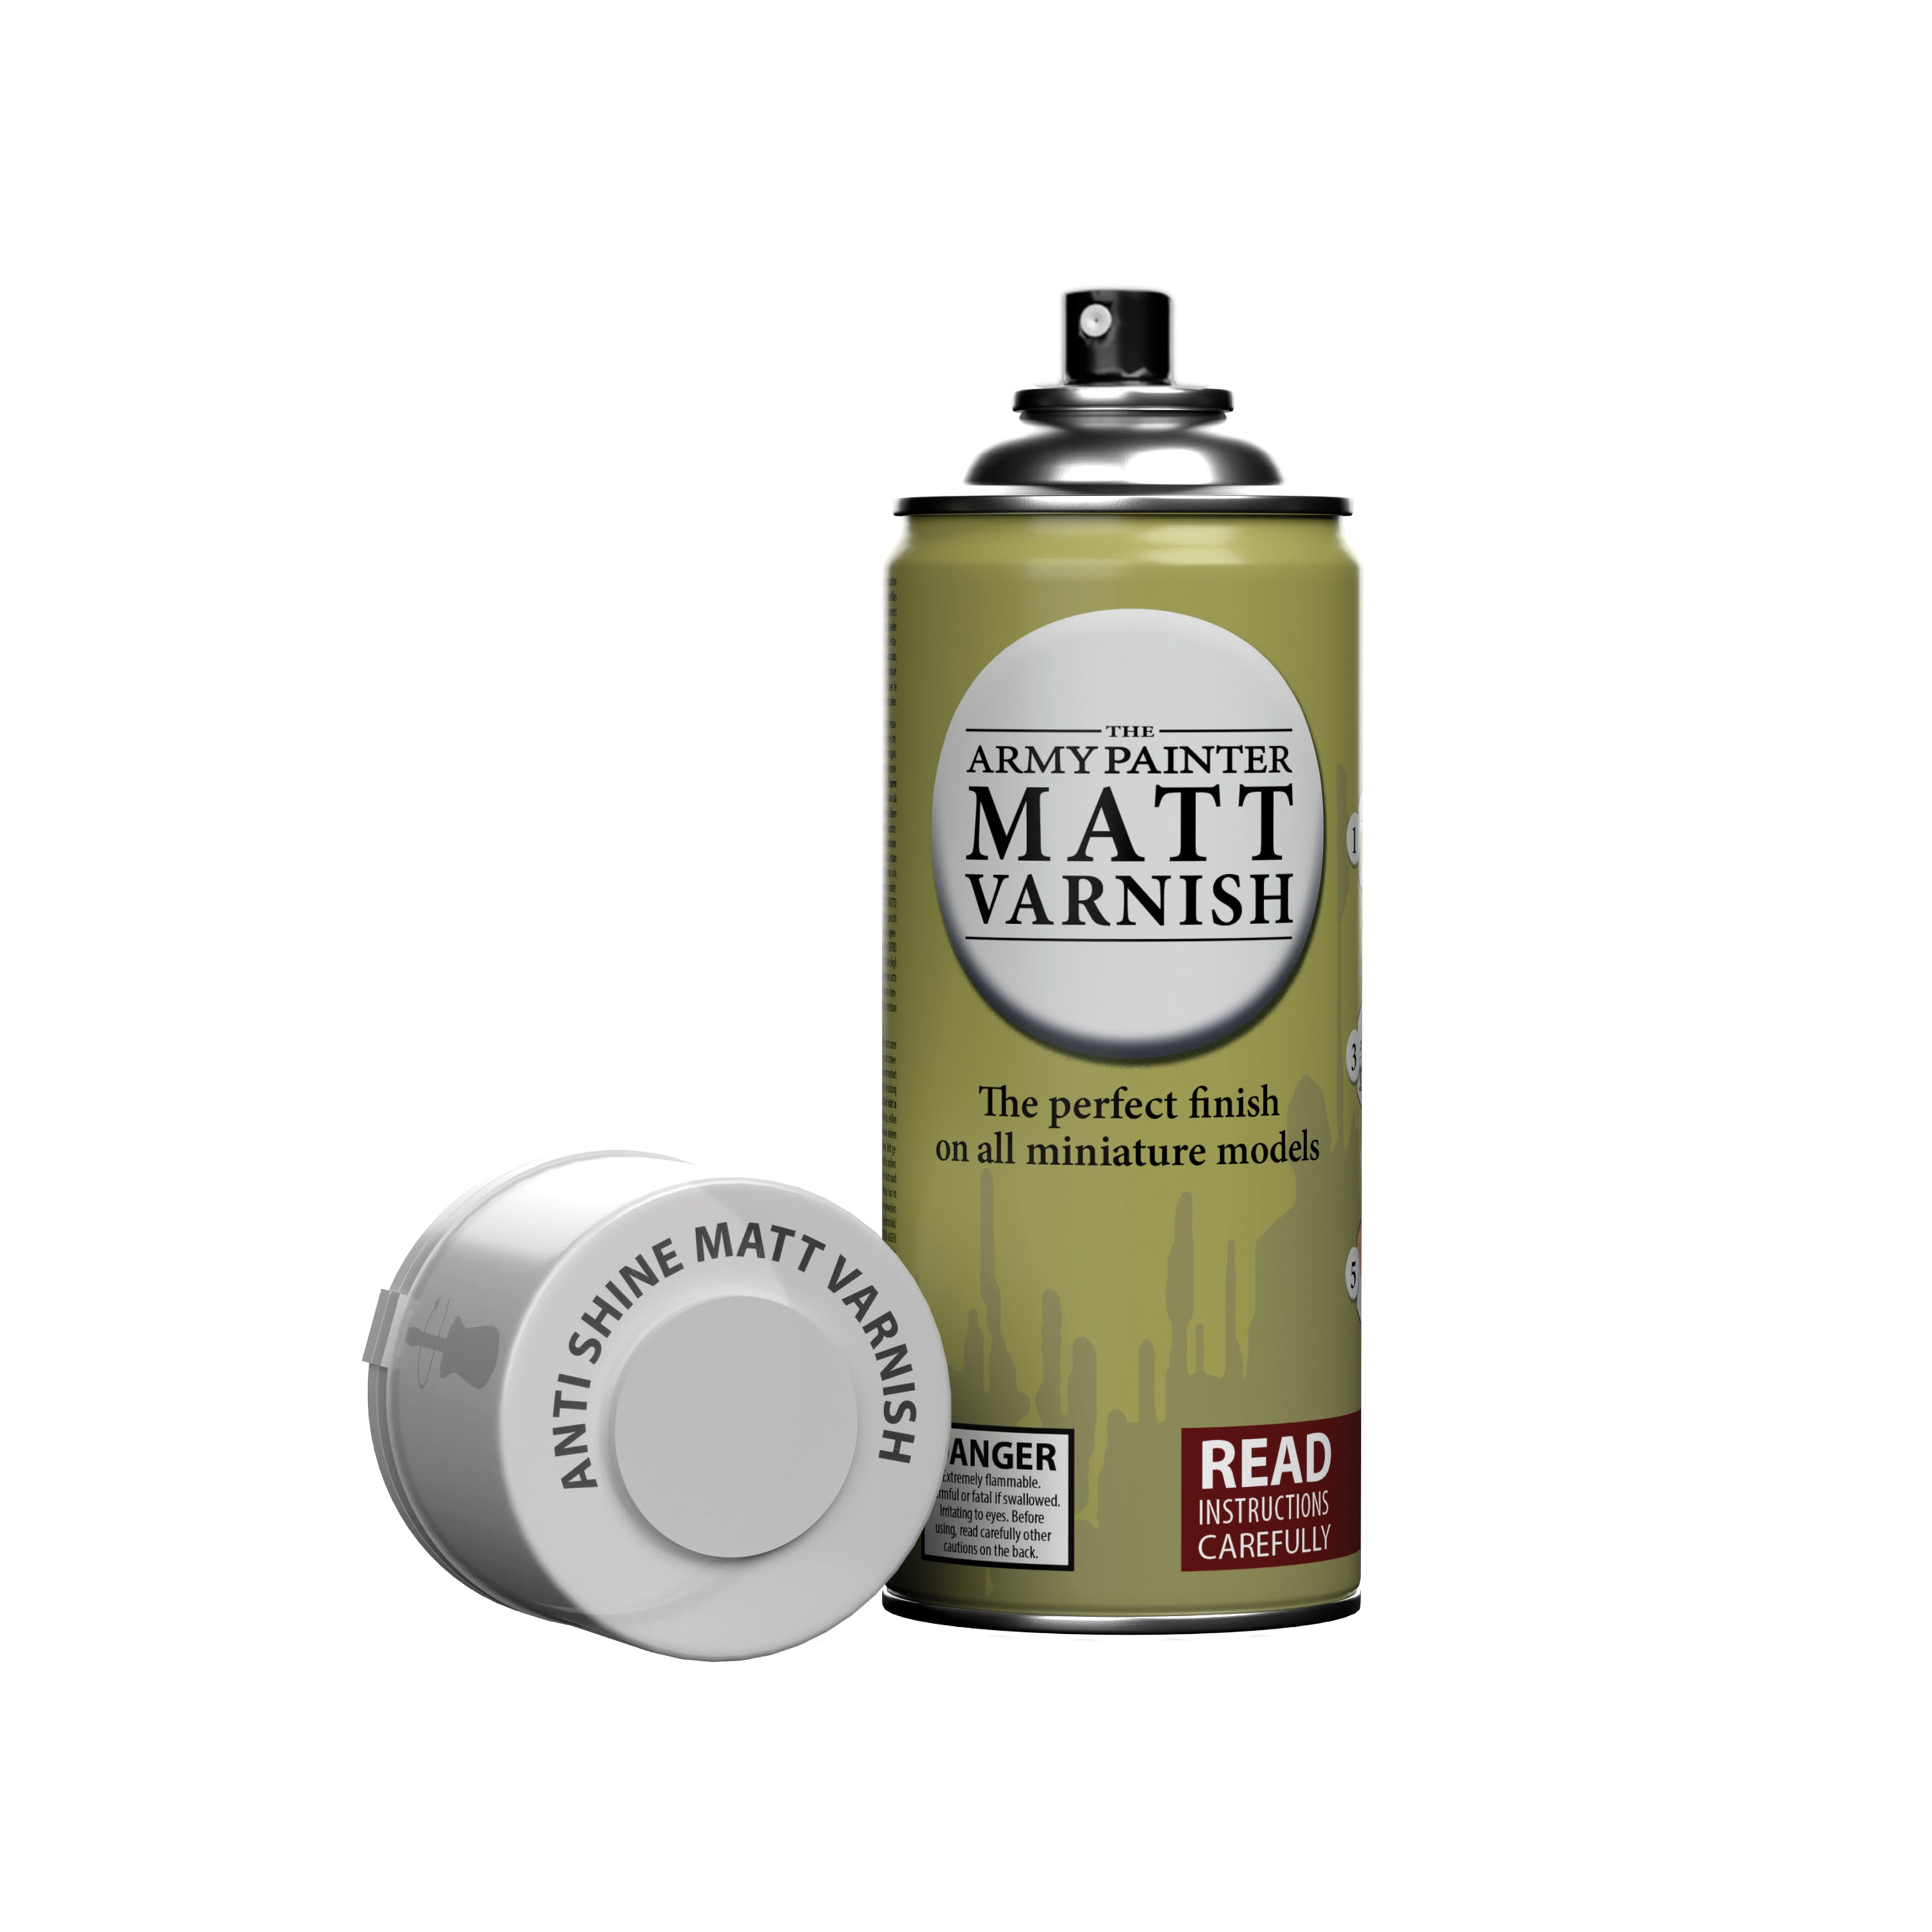 Army Painter Colour Primer: Plate Mail Metal